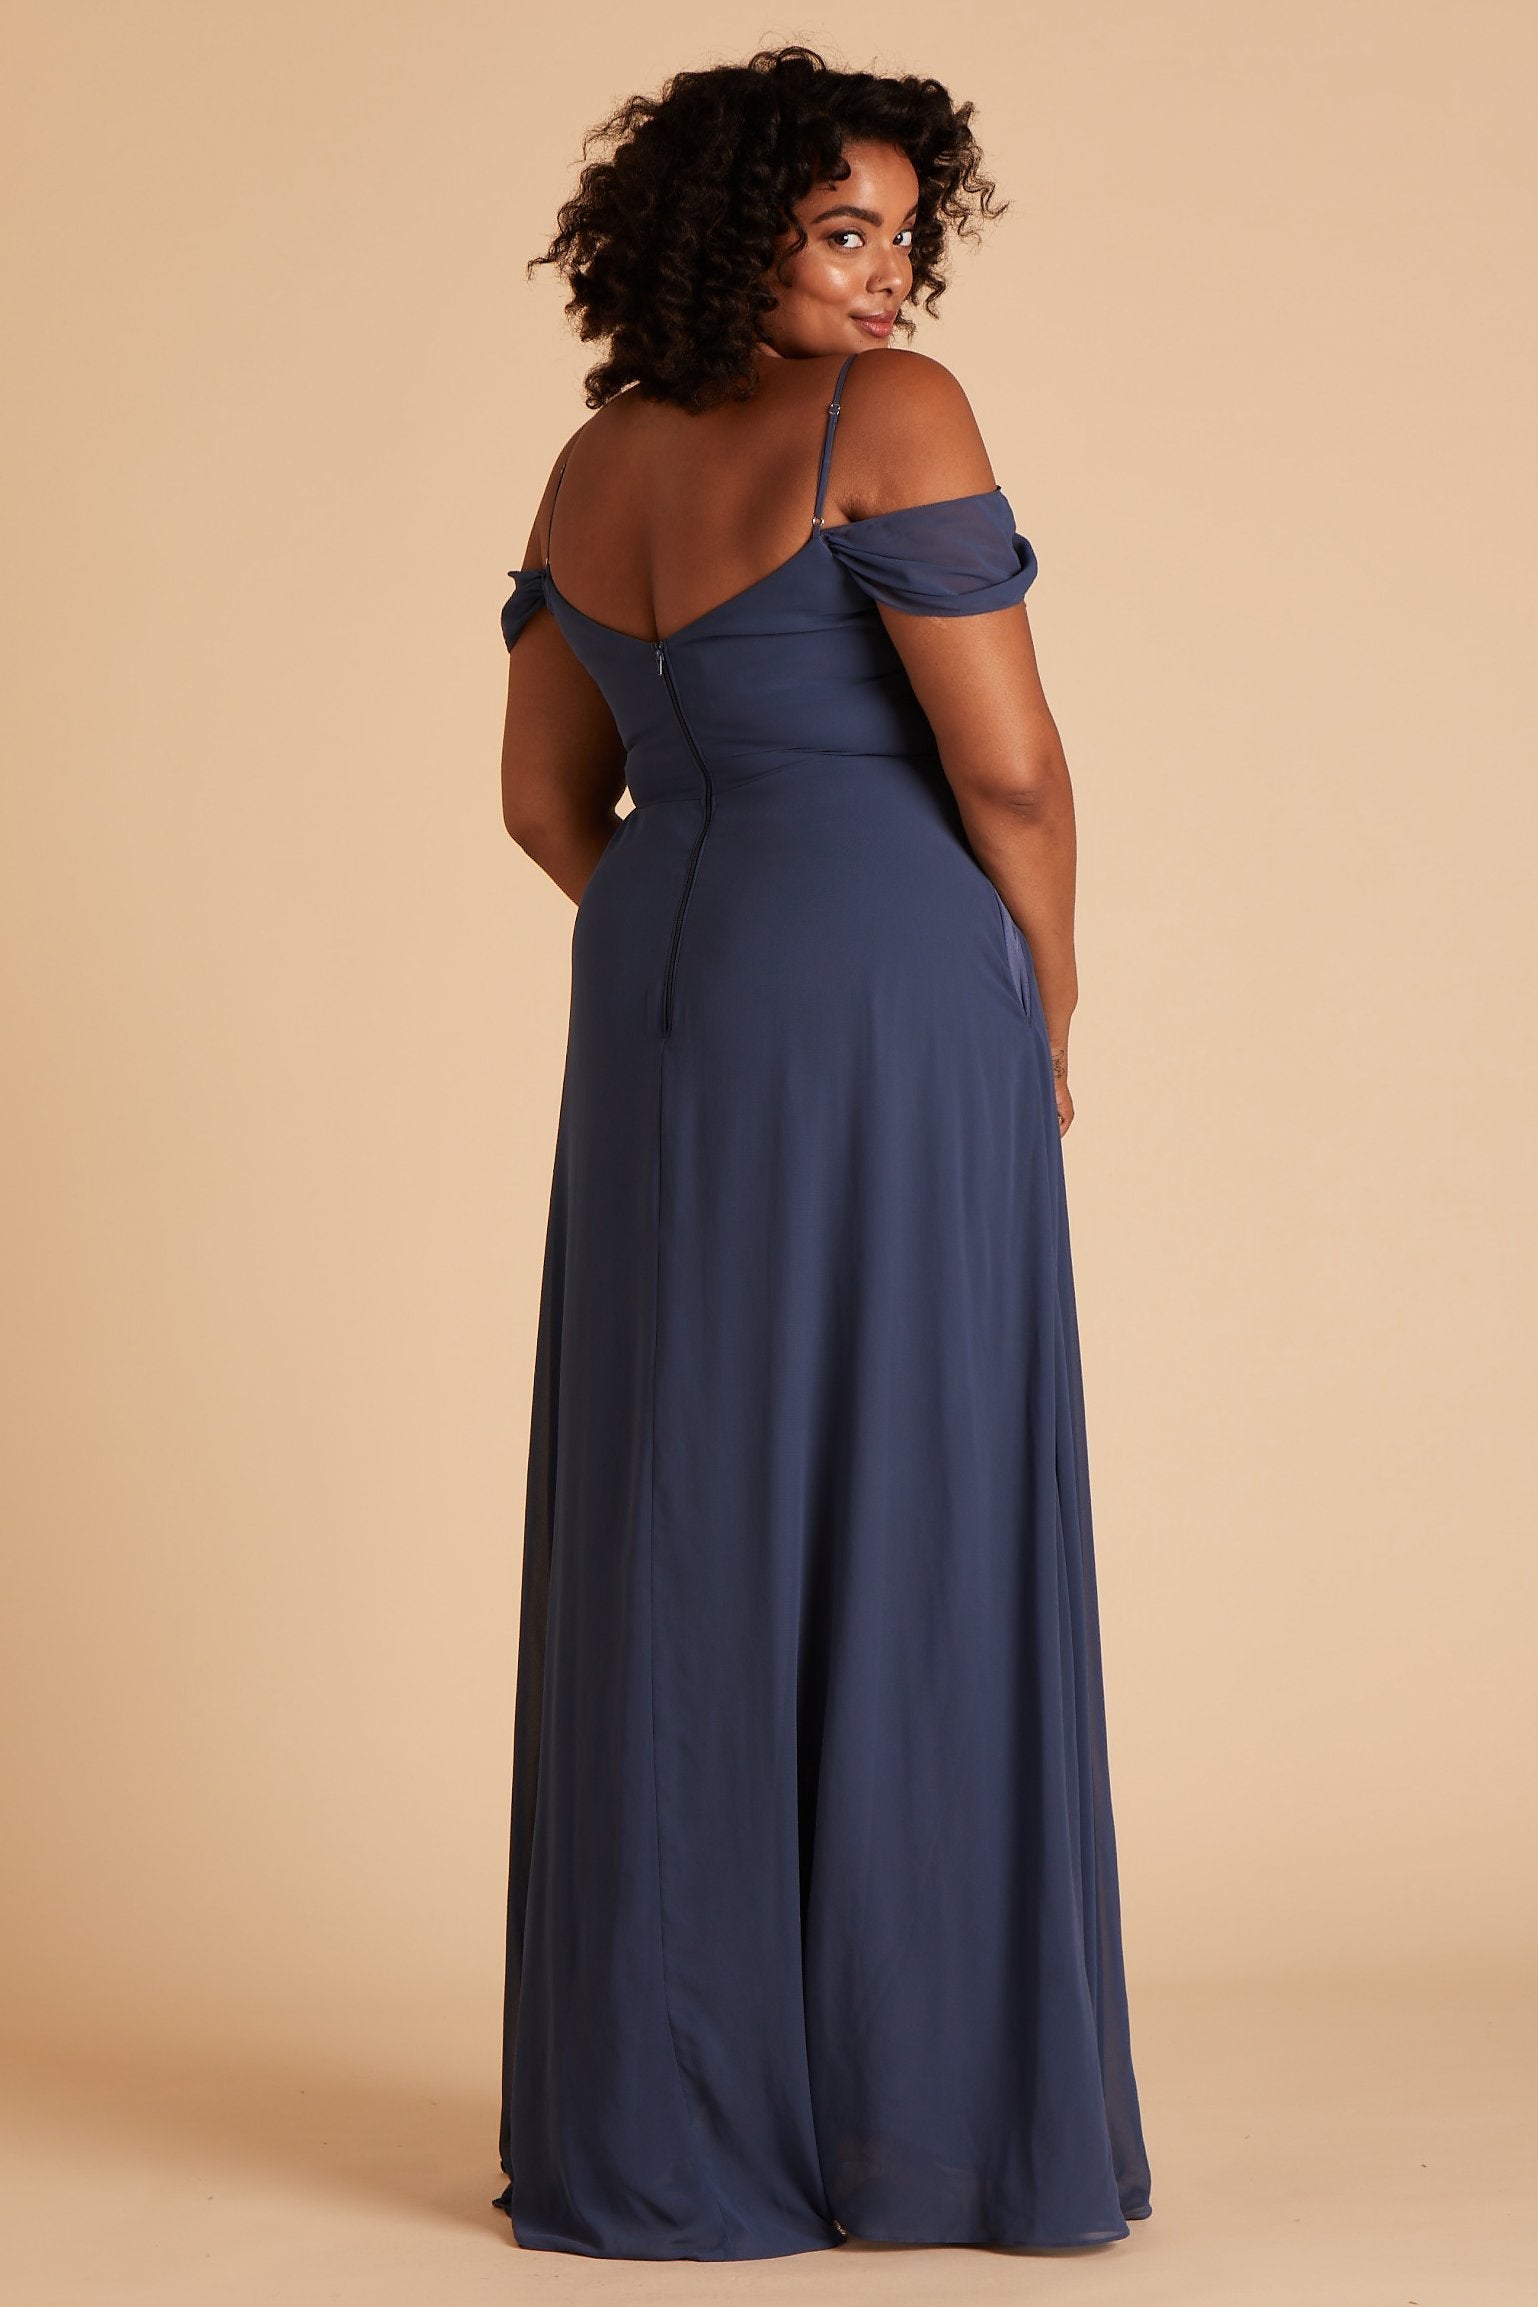 Devin convertible plus size bridesmaids dress in slate blue chiffon by Birdy Grey, back view